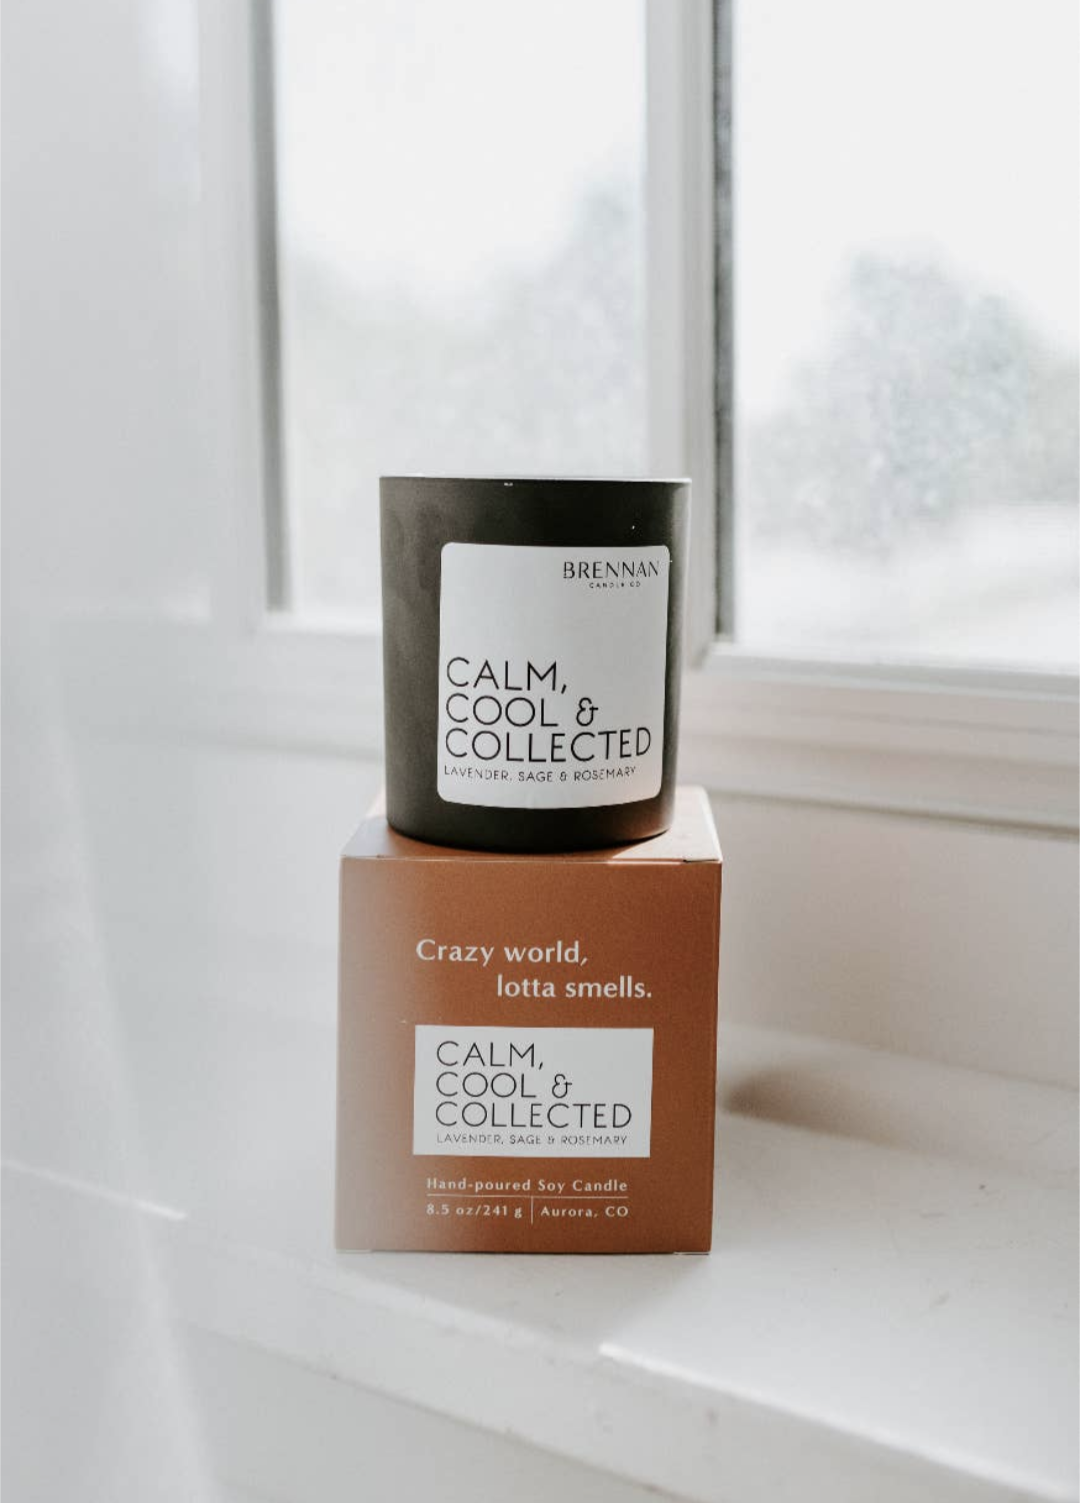 Brennan Candle Co. - Calm, Cool & Collected